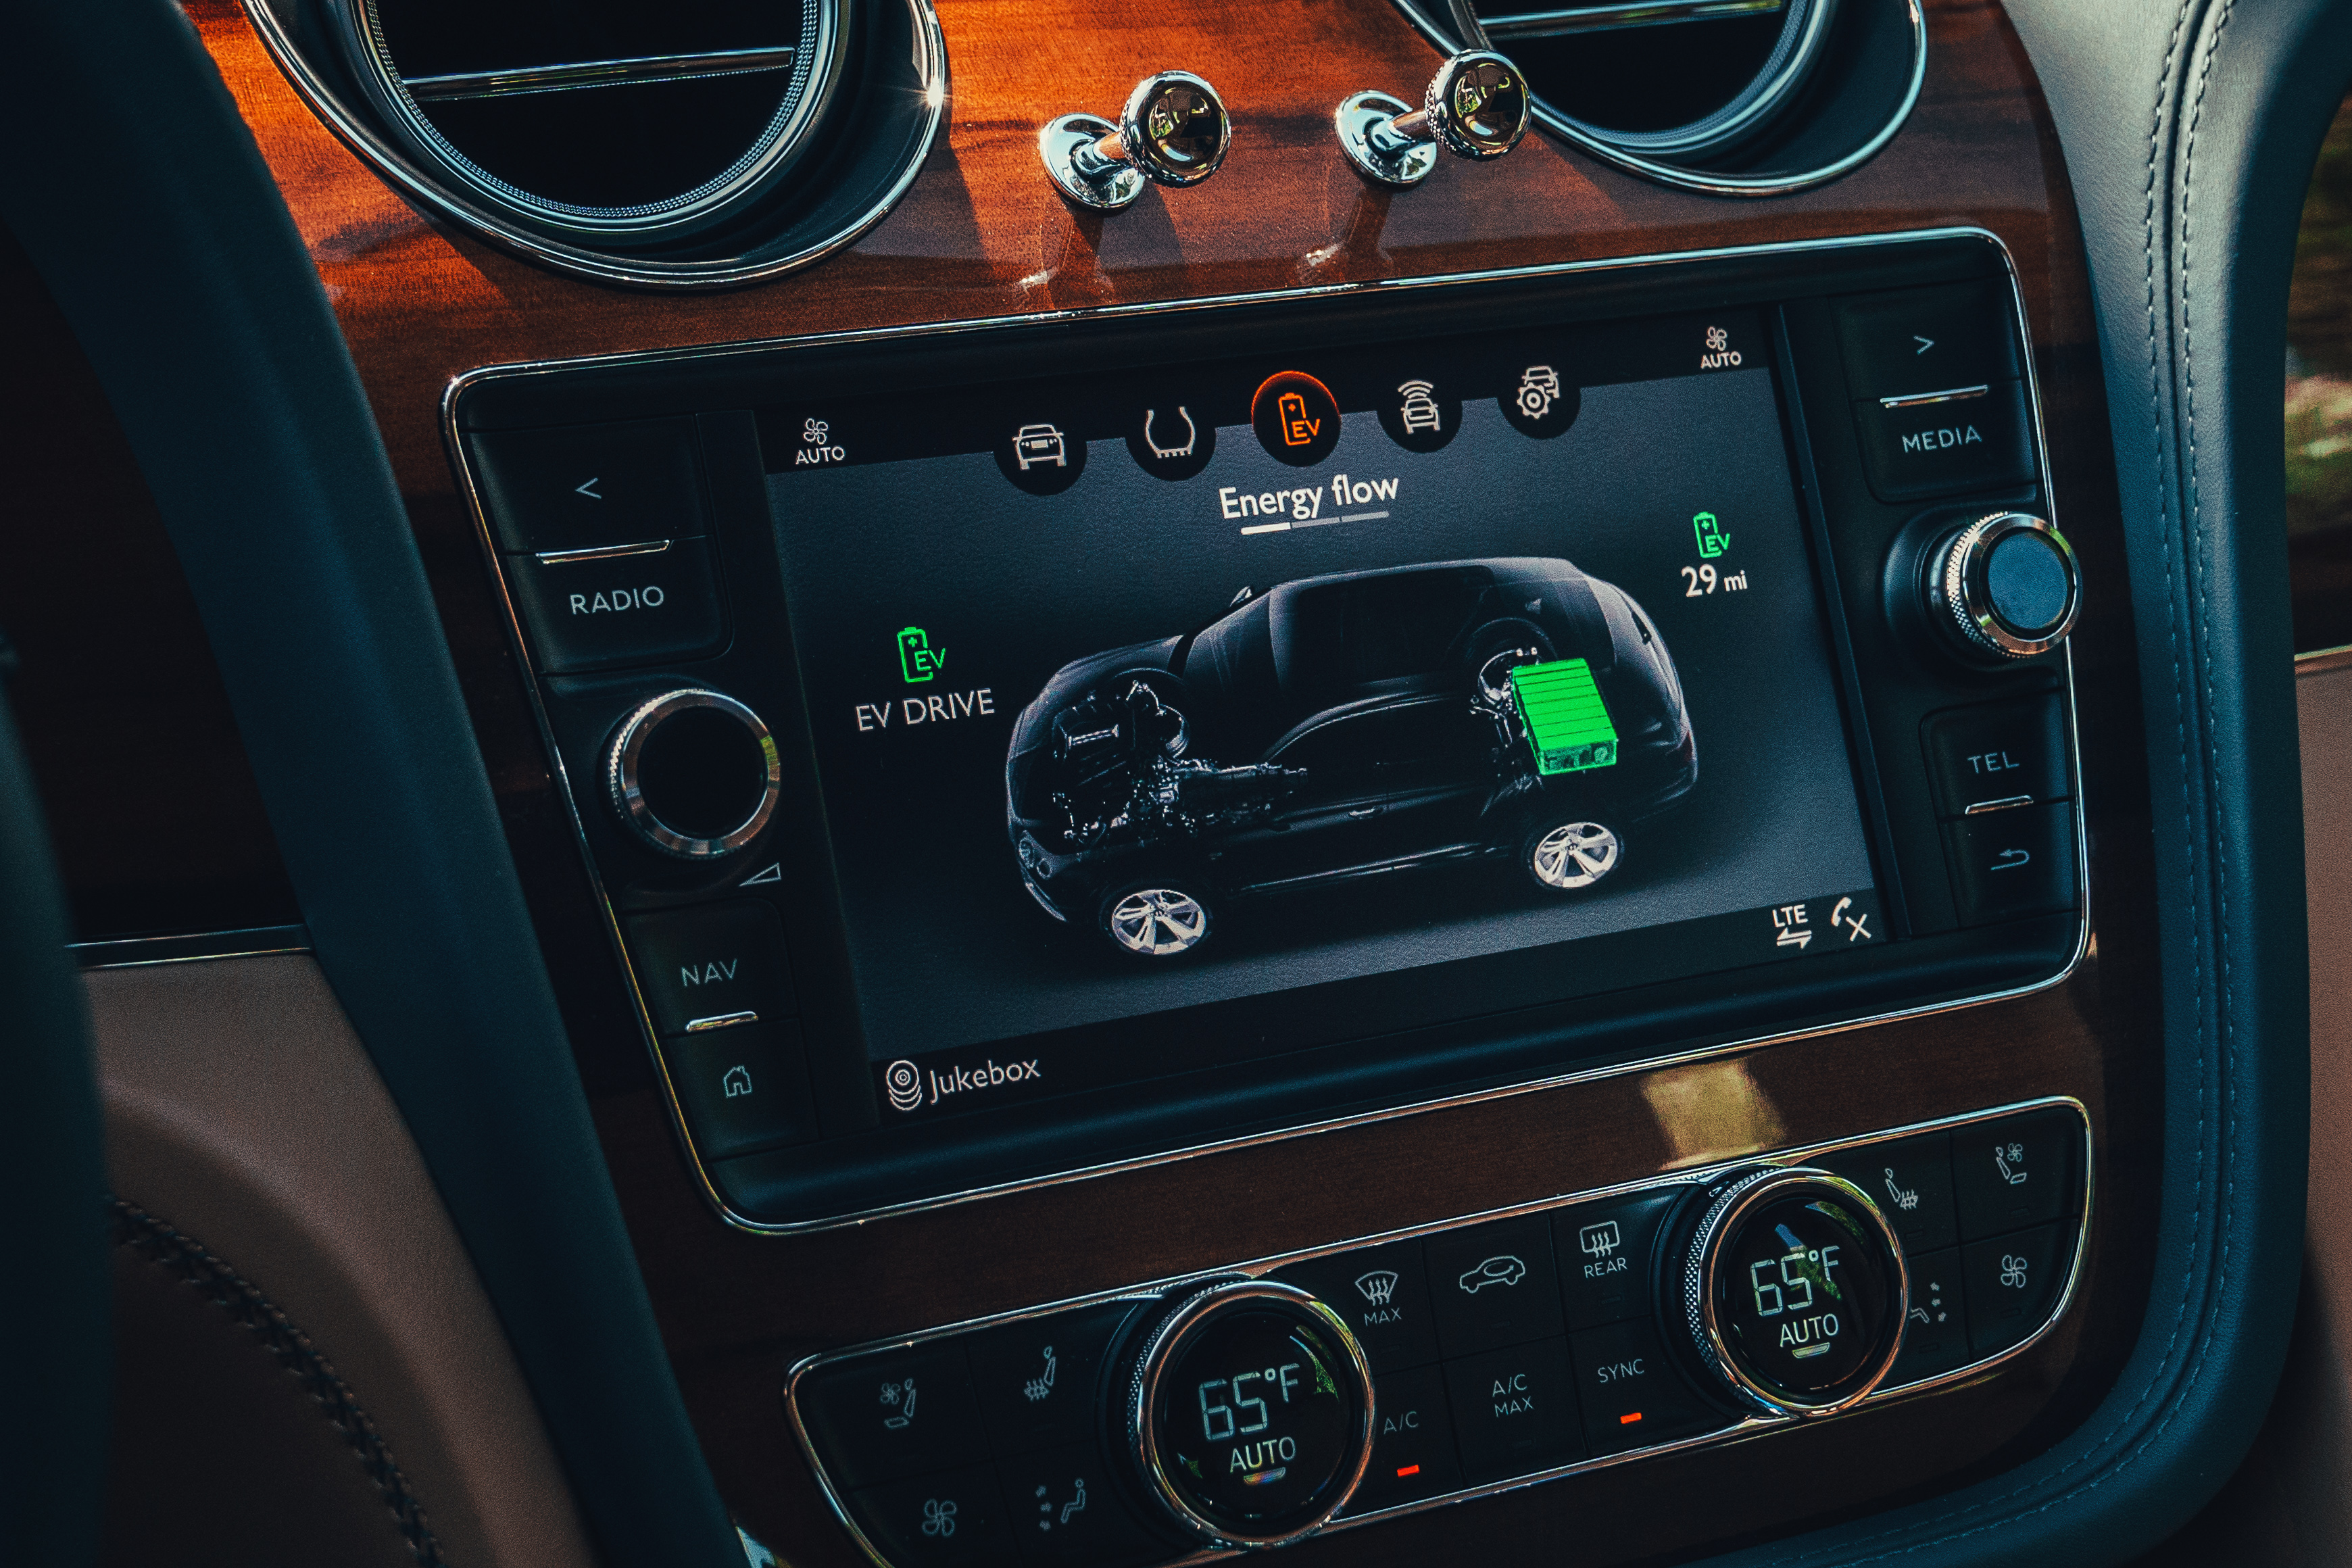 The infotainment system can be used to display information relating to the hybrid powertrain 